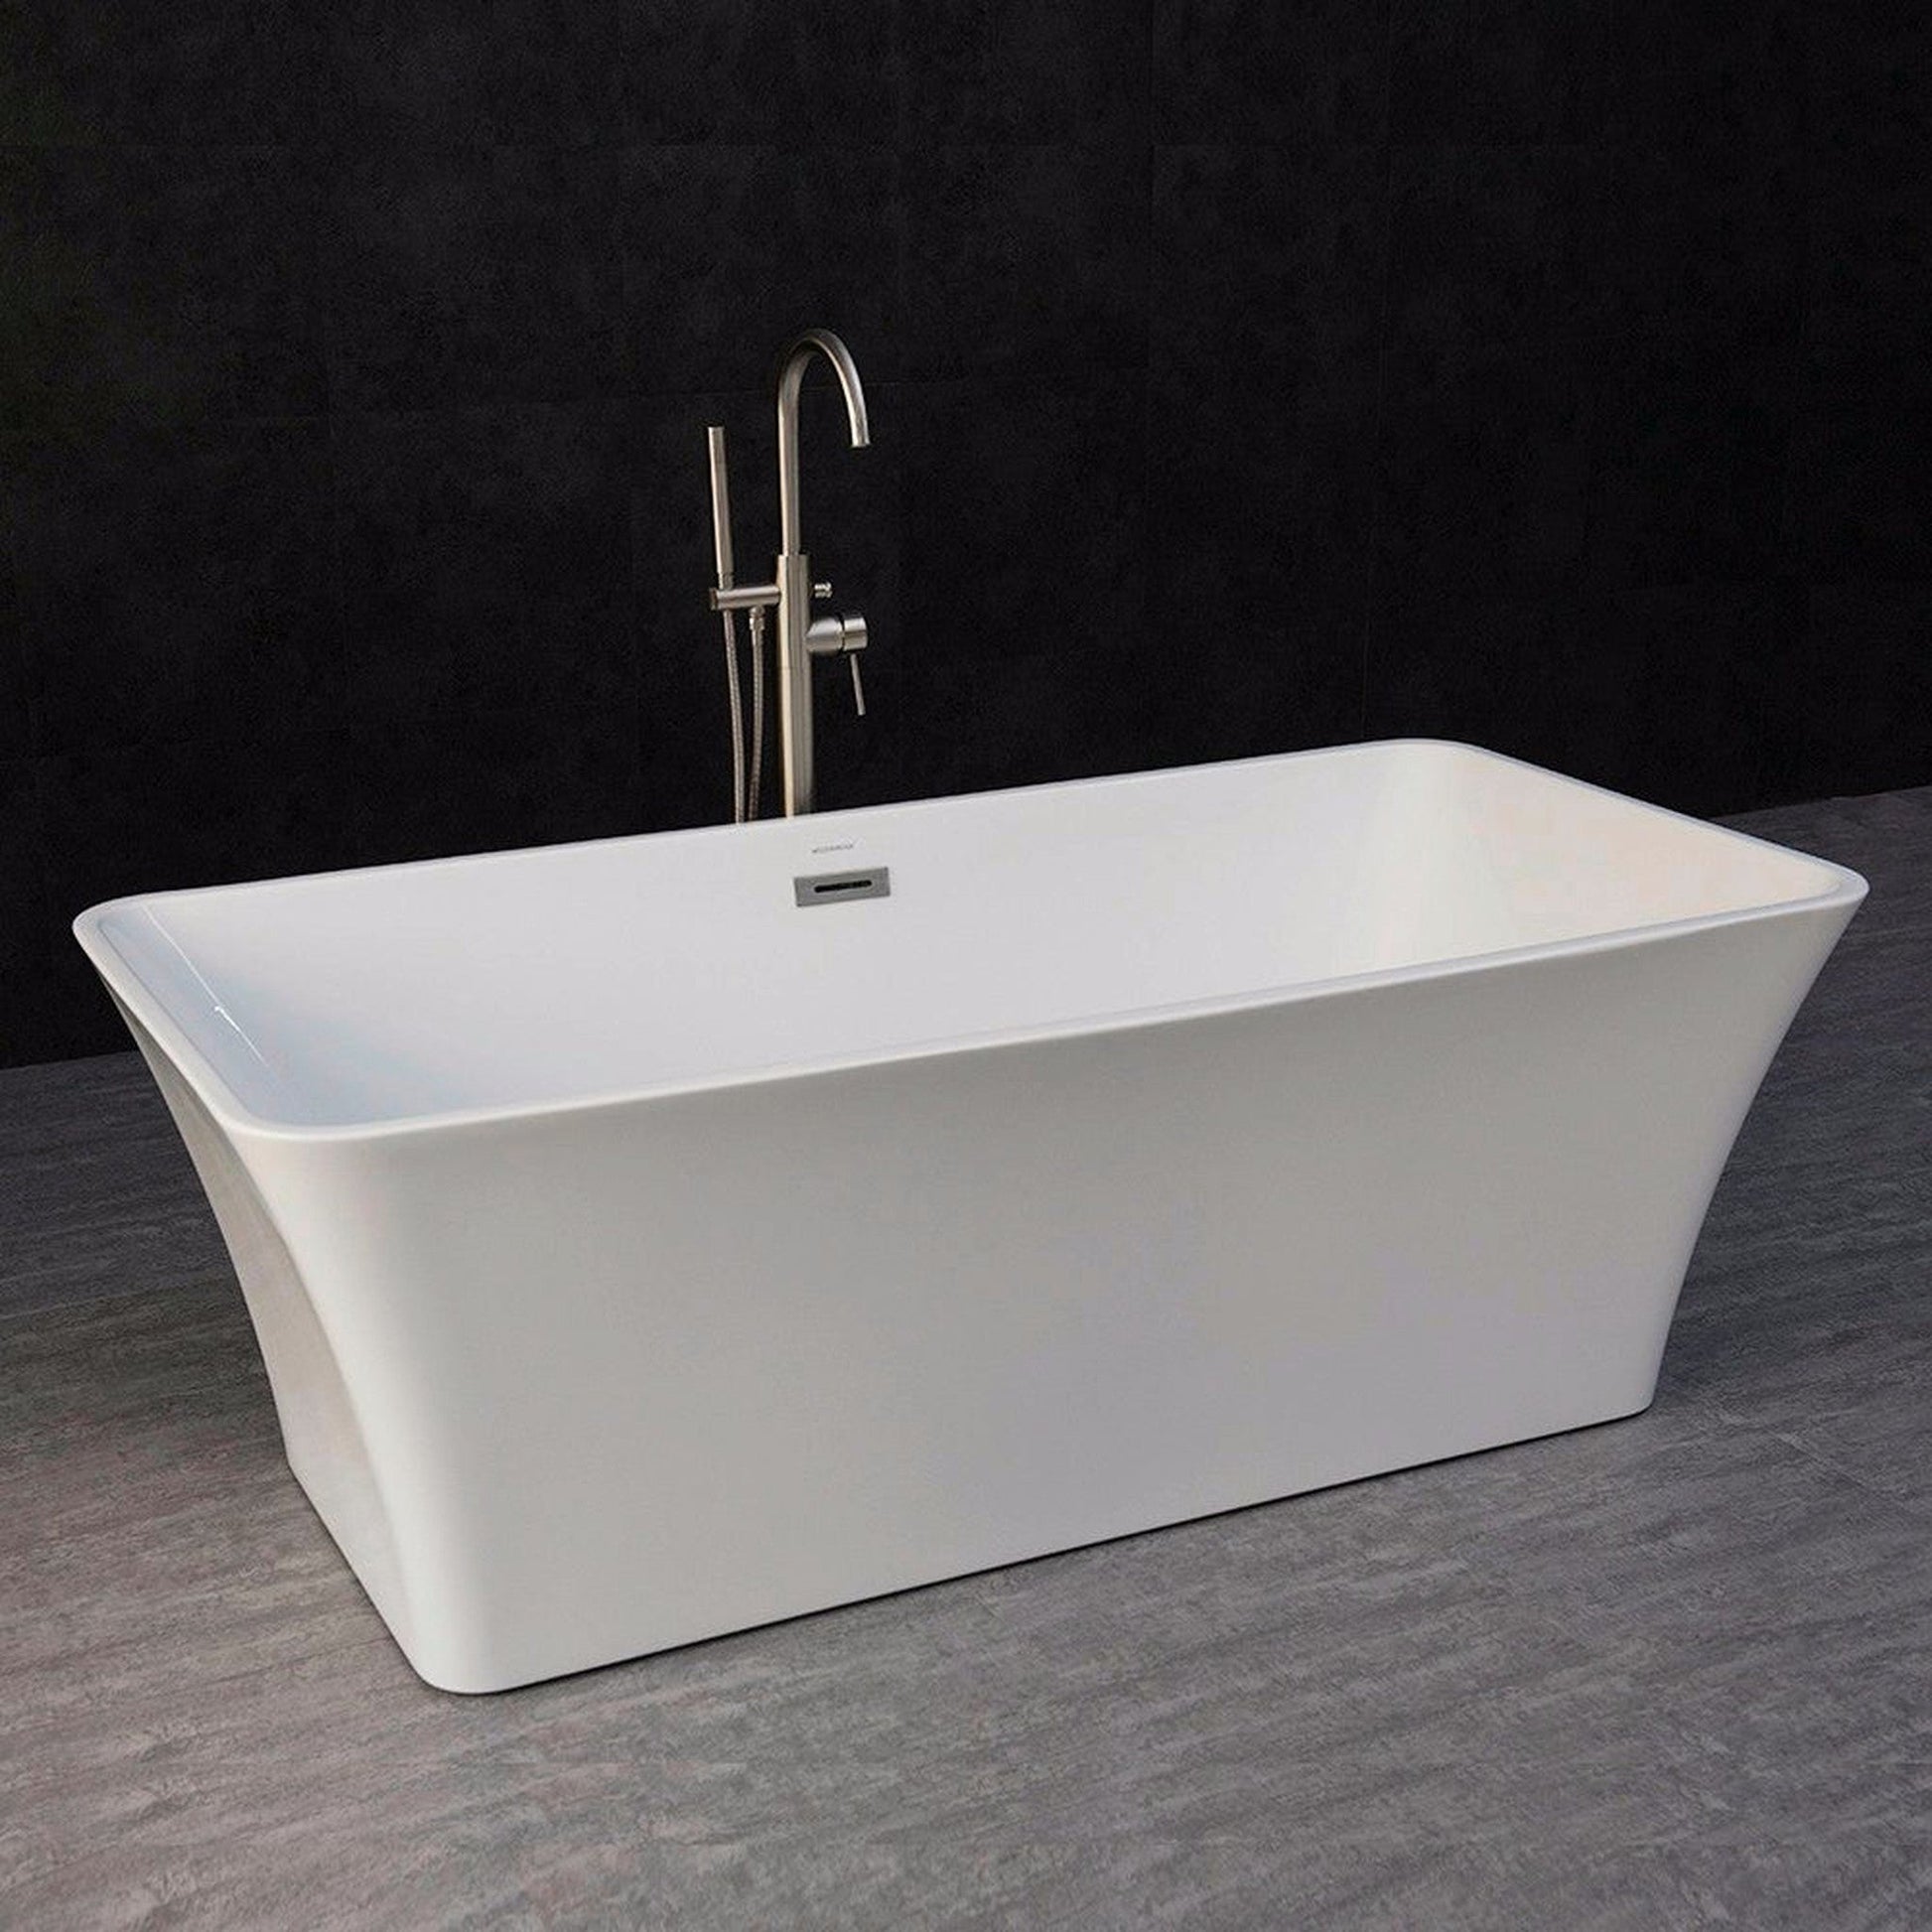 WoodBridge B0004 67" White Acrylic Freestanding Soaking Bathtub With Brushed Nickel Drain, Overflow, F0070BNVT Tub Filler and Caddy Tray